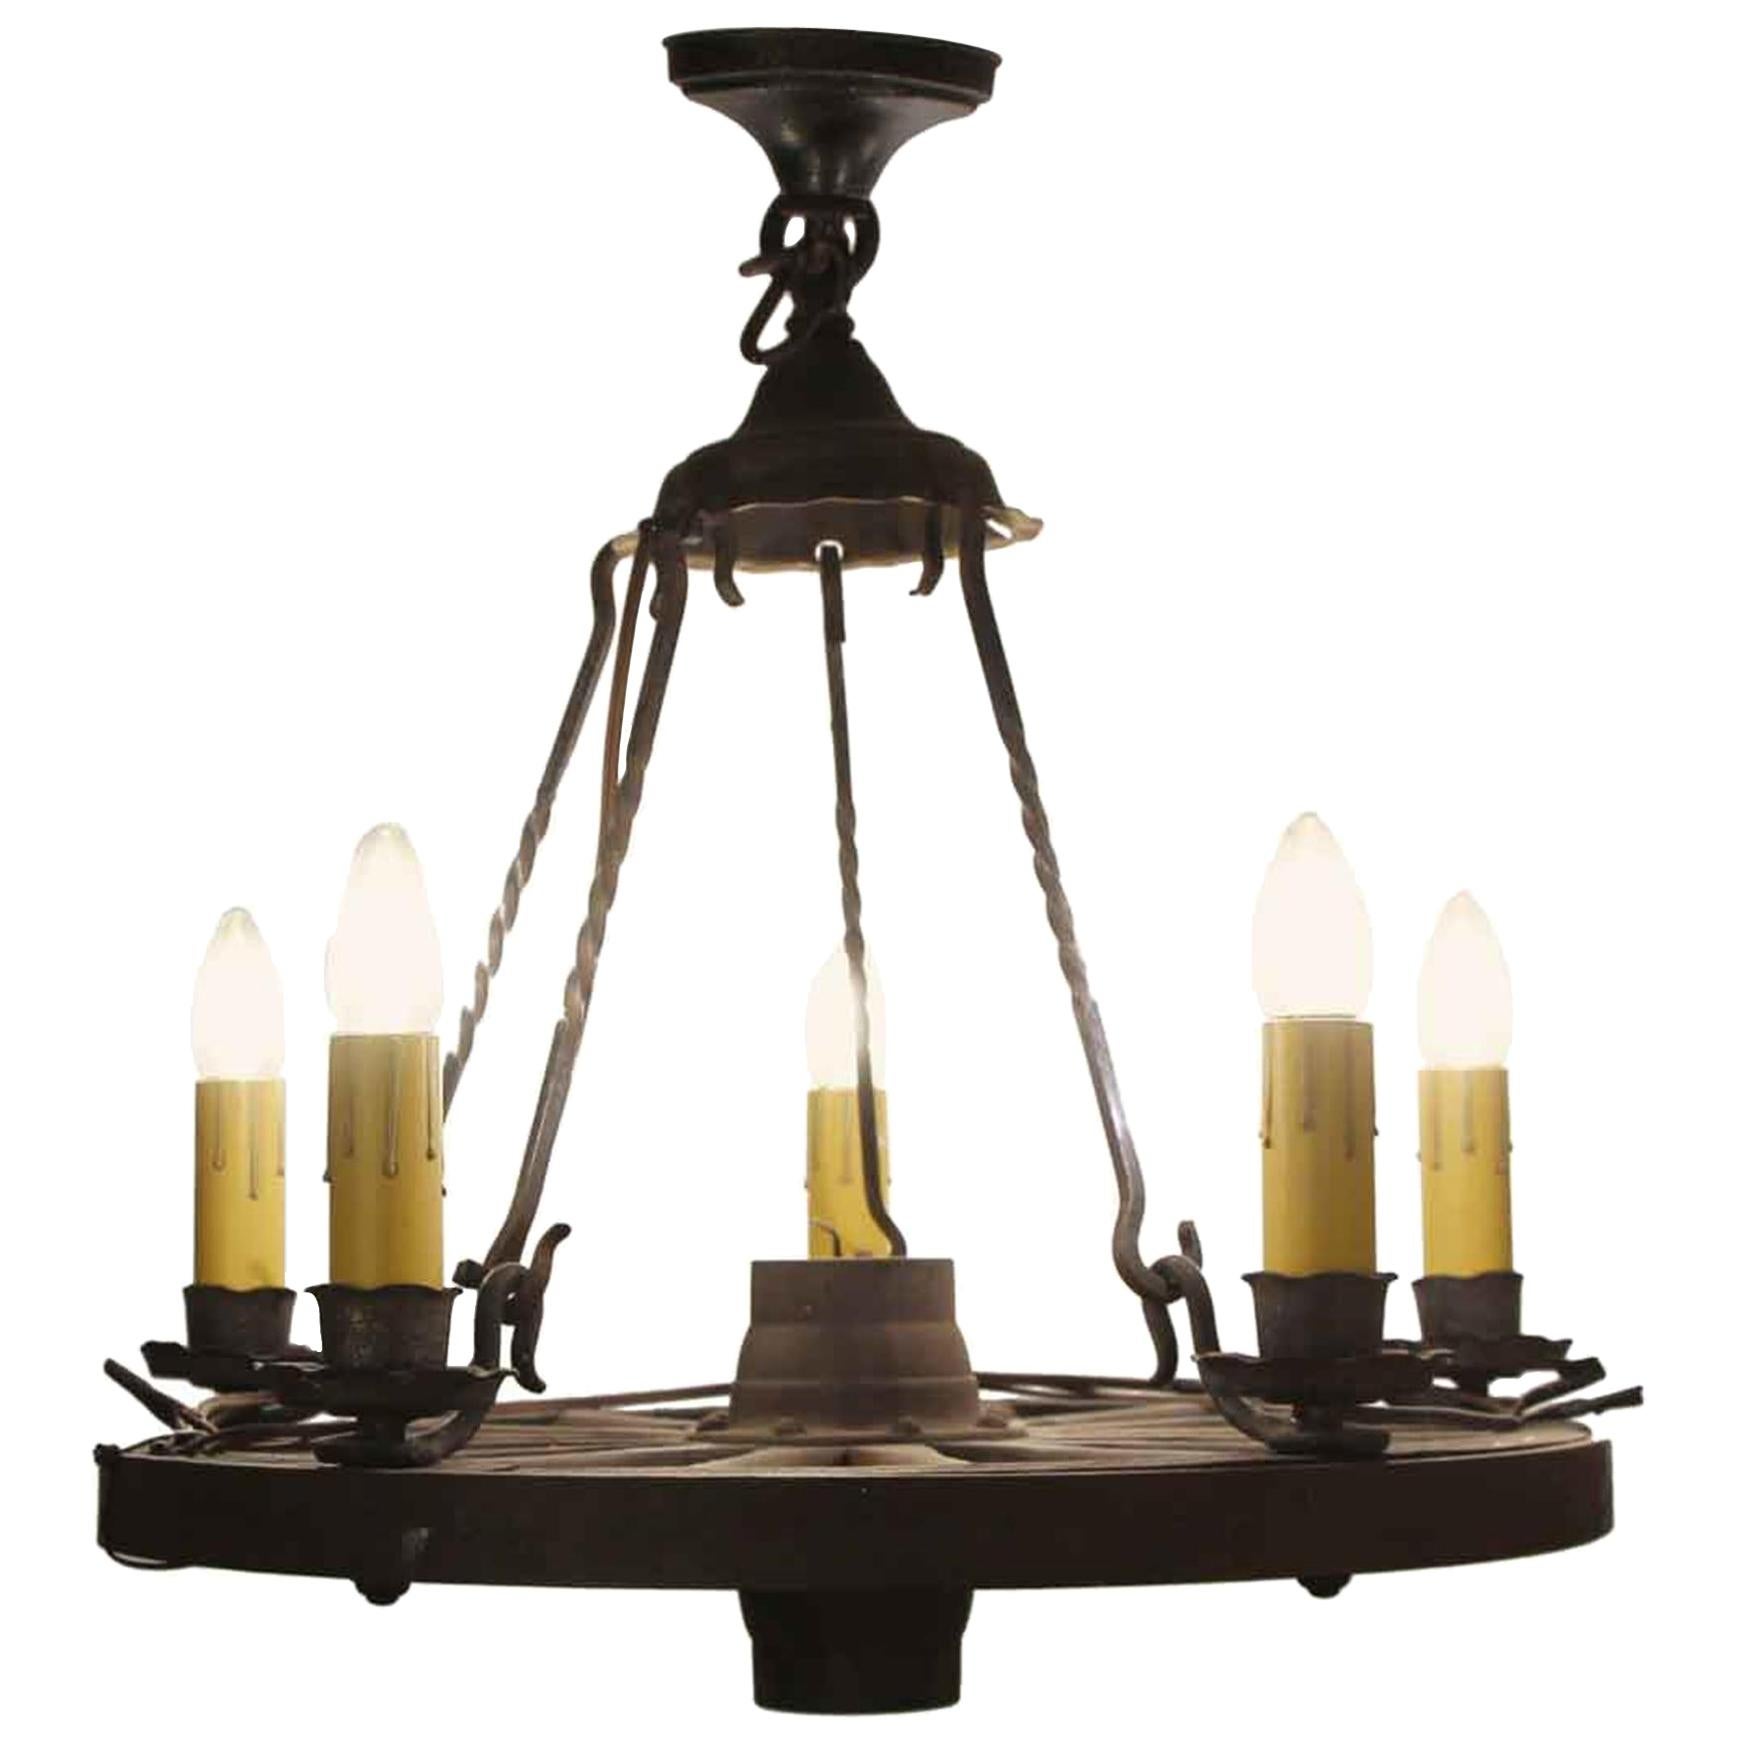 1940s Wood and Wrought Iron Five-Light Wagon Wheel Chandelier